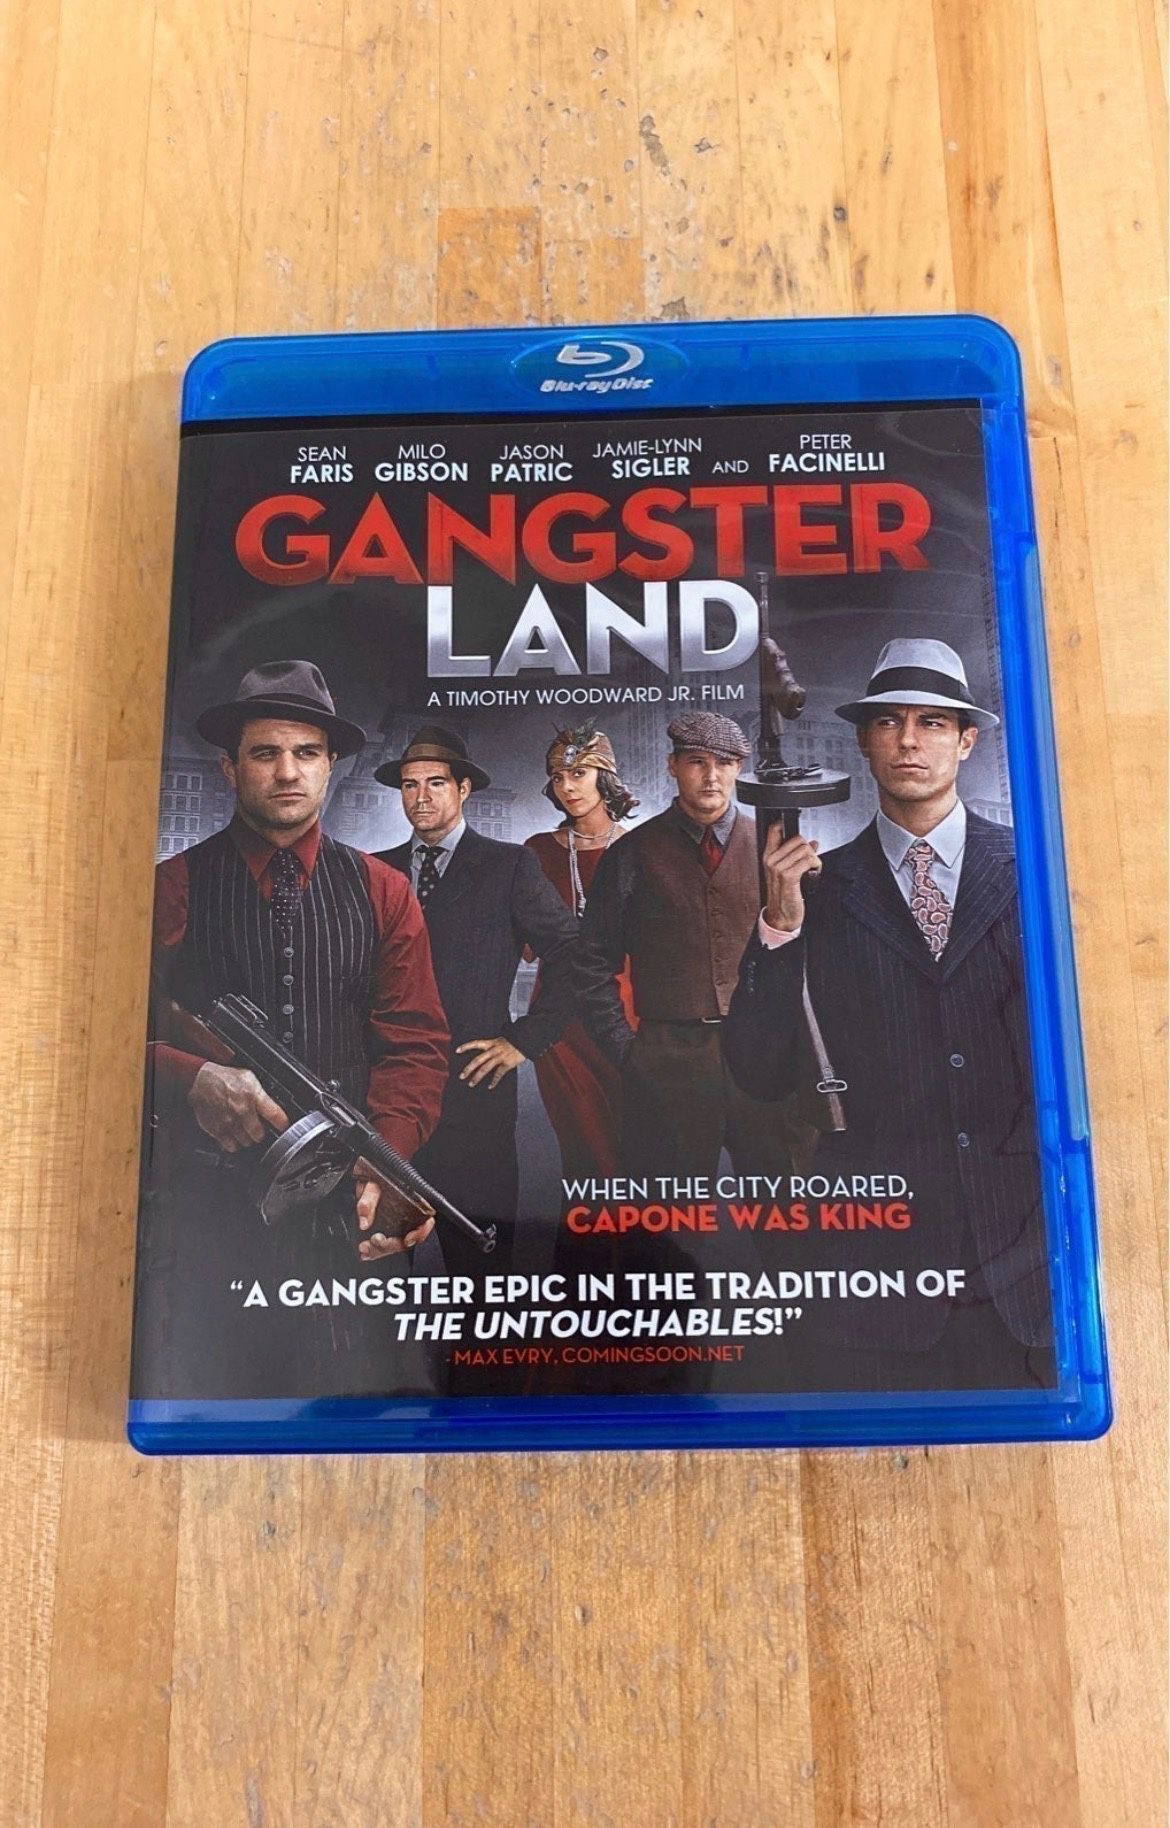 Gangster Land 2017 Blu-ray Chicago Outfit Al Capone Mafia Gibson Faris Sigler Pa